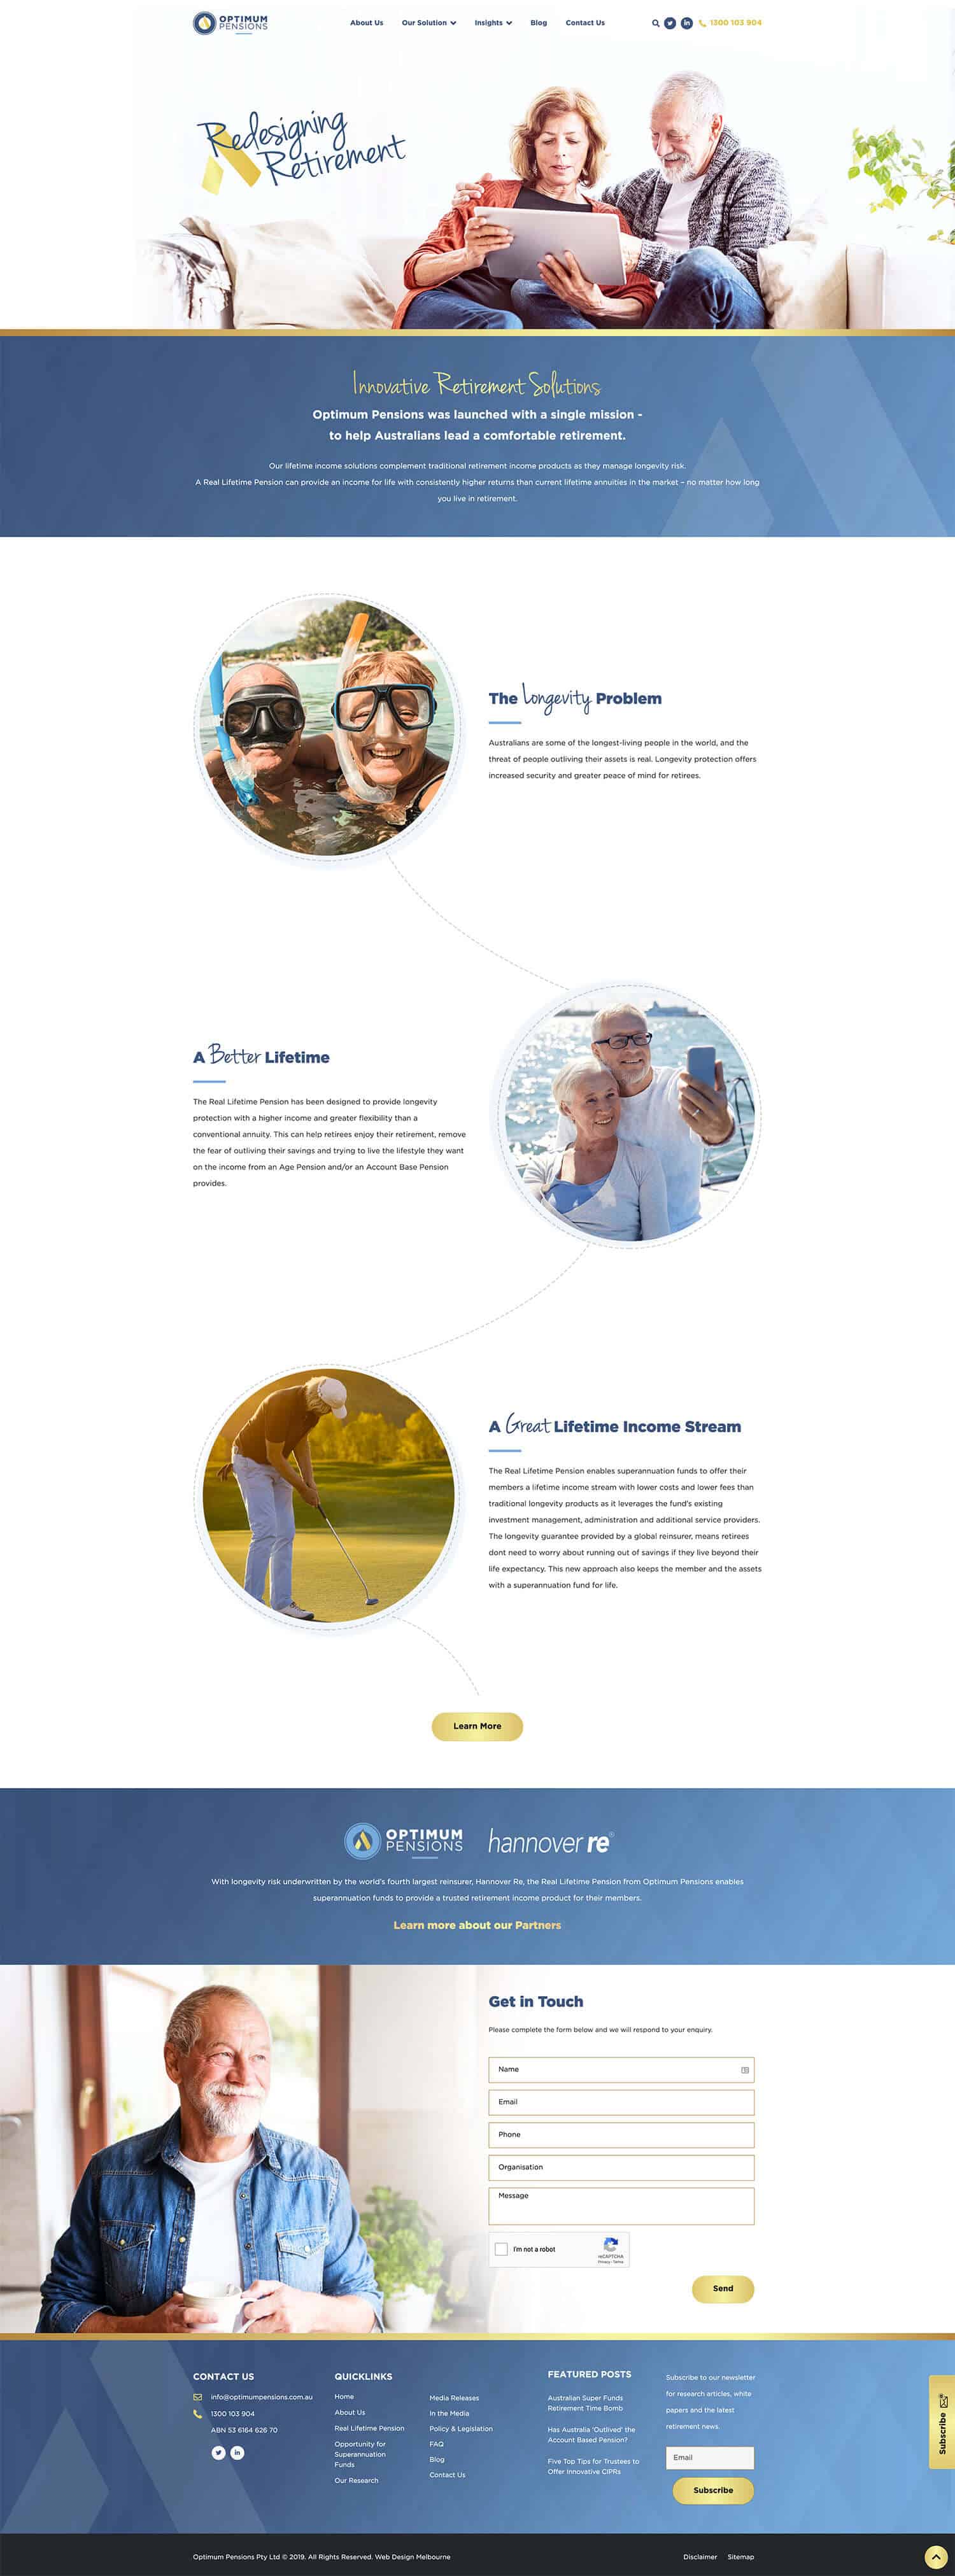 Opimum Pensions Home Page Website Design